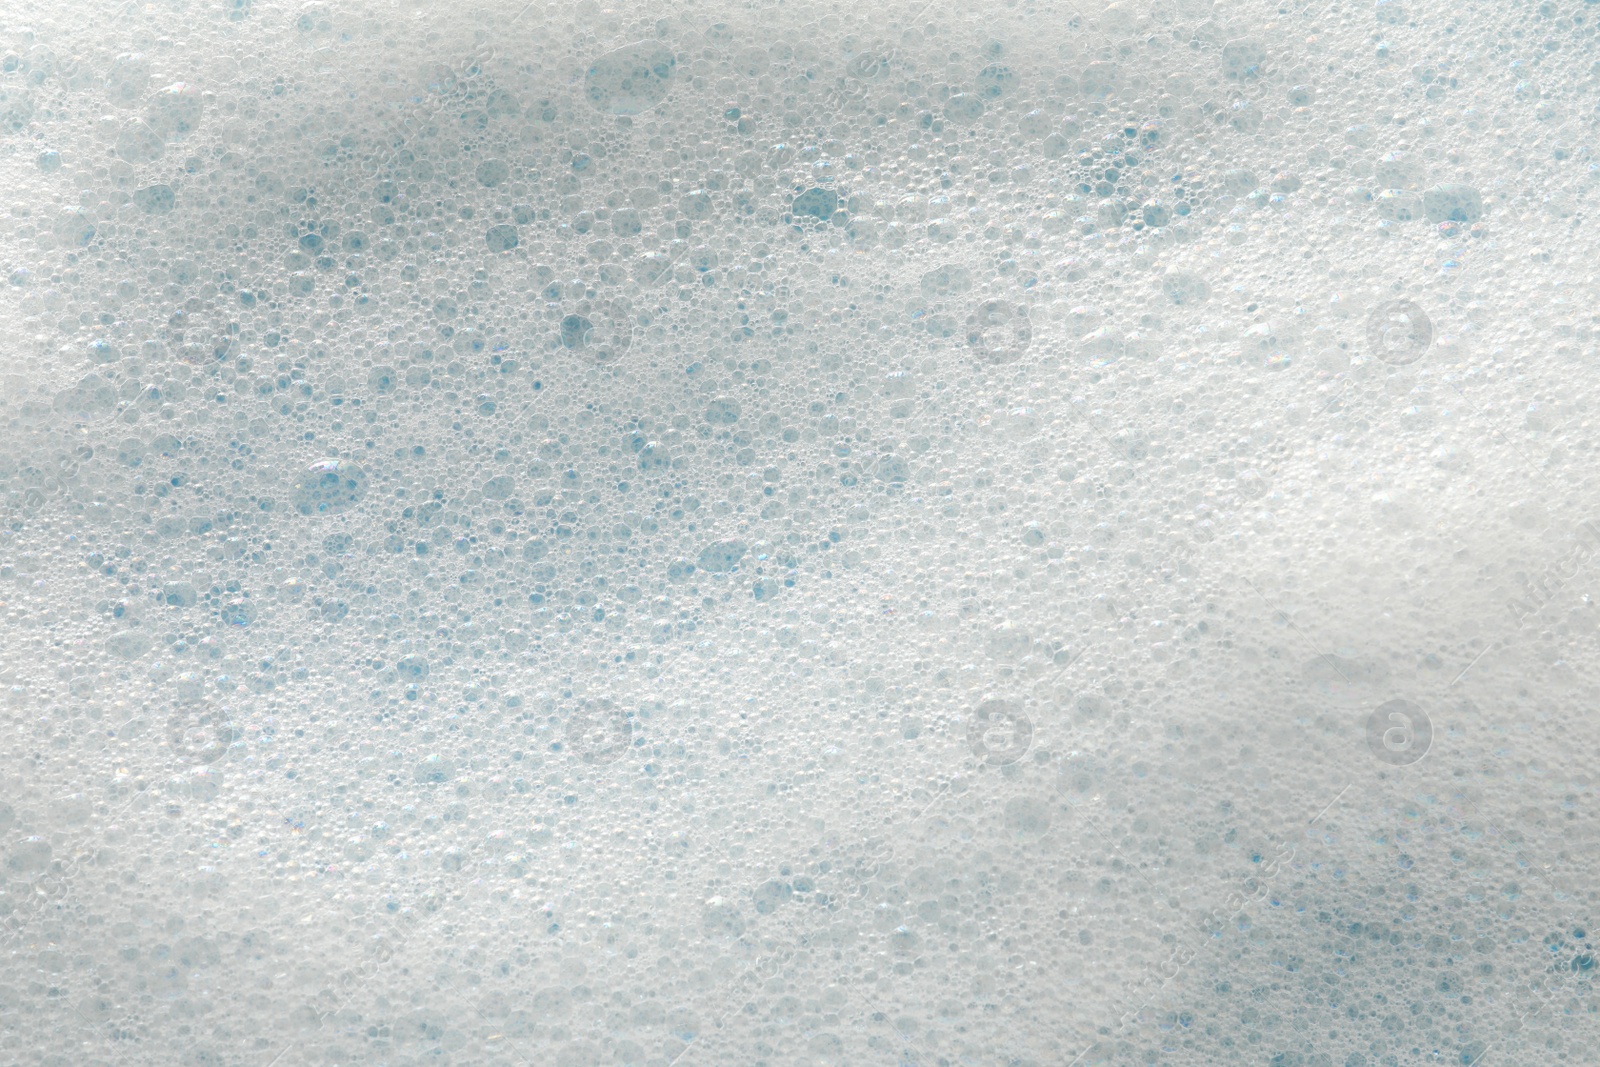 Photo of White washing foam as background, top view